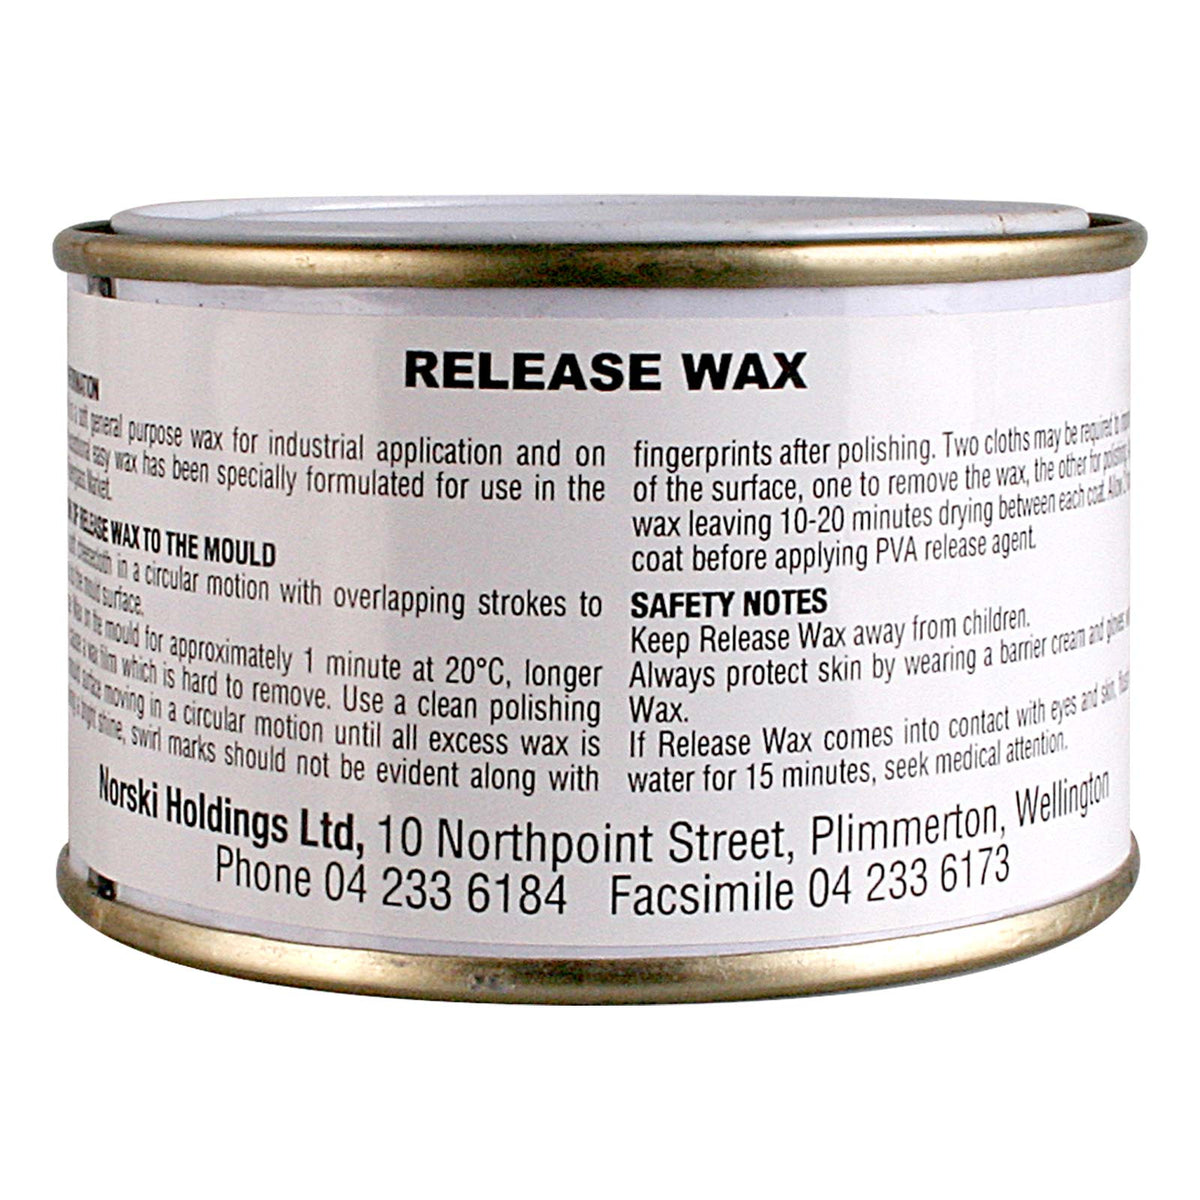 Norski Mould Release Wax